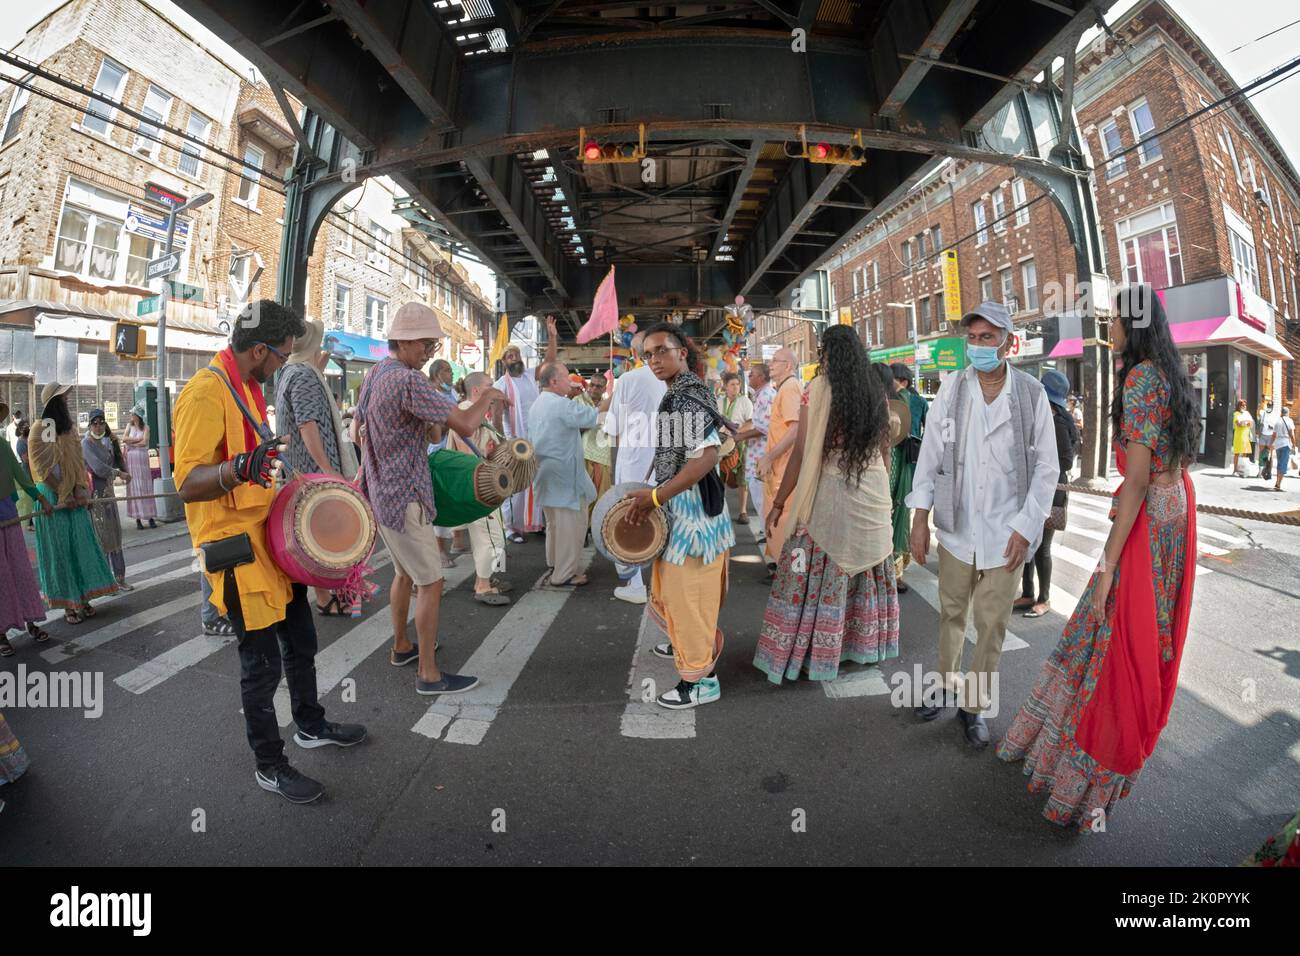 A fisheye lens view of marchers & musicians at the Hindu Ratha Yatra parade on LIberty Ave in Richmond Hill, Queens, New York City. Stock Photo